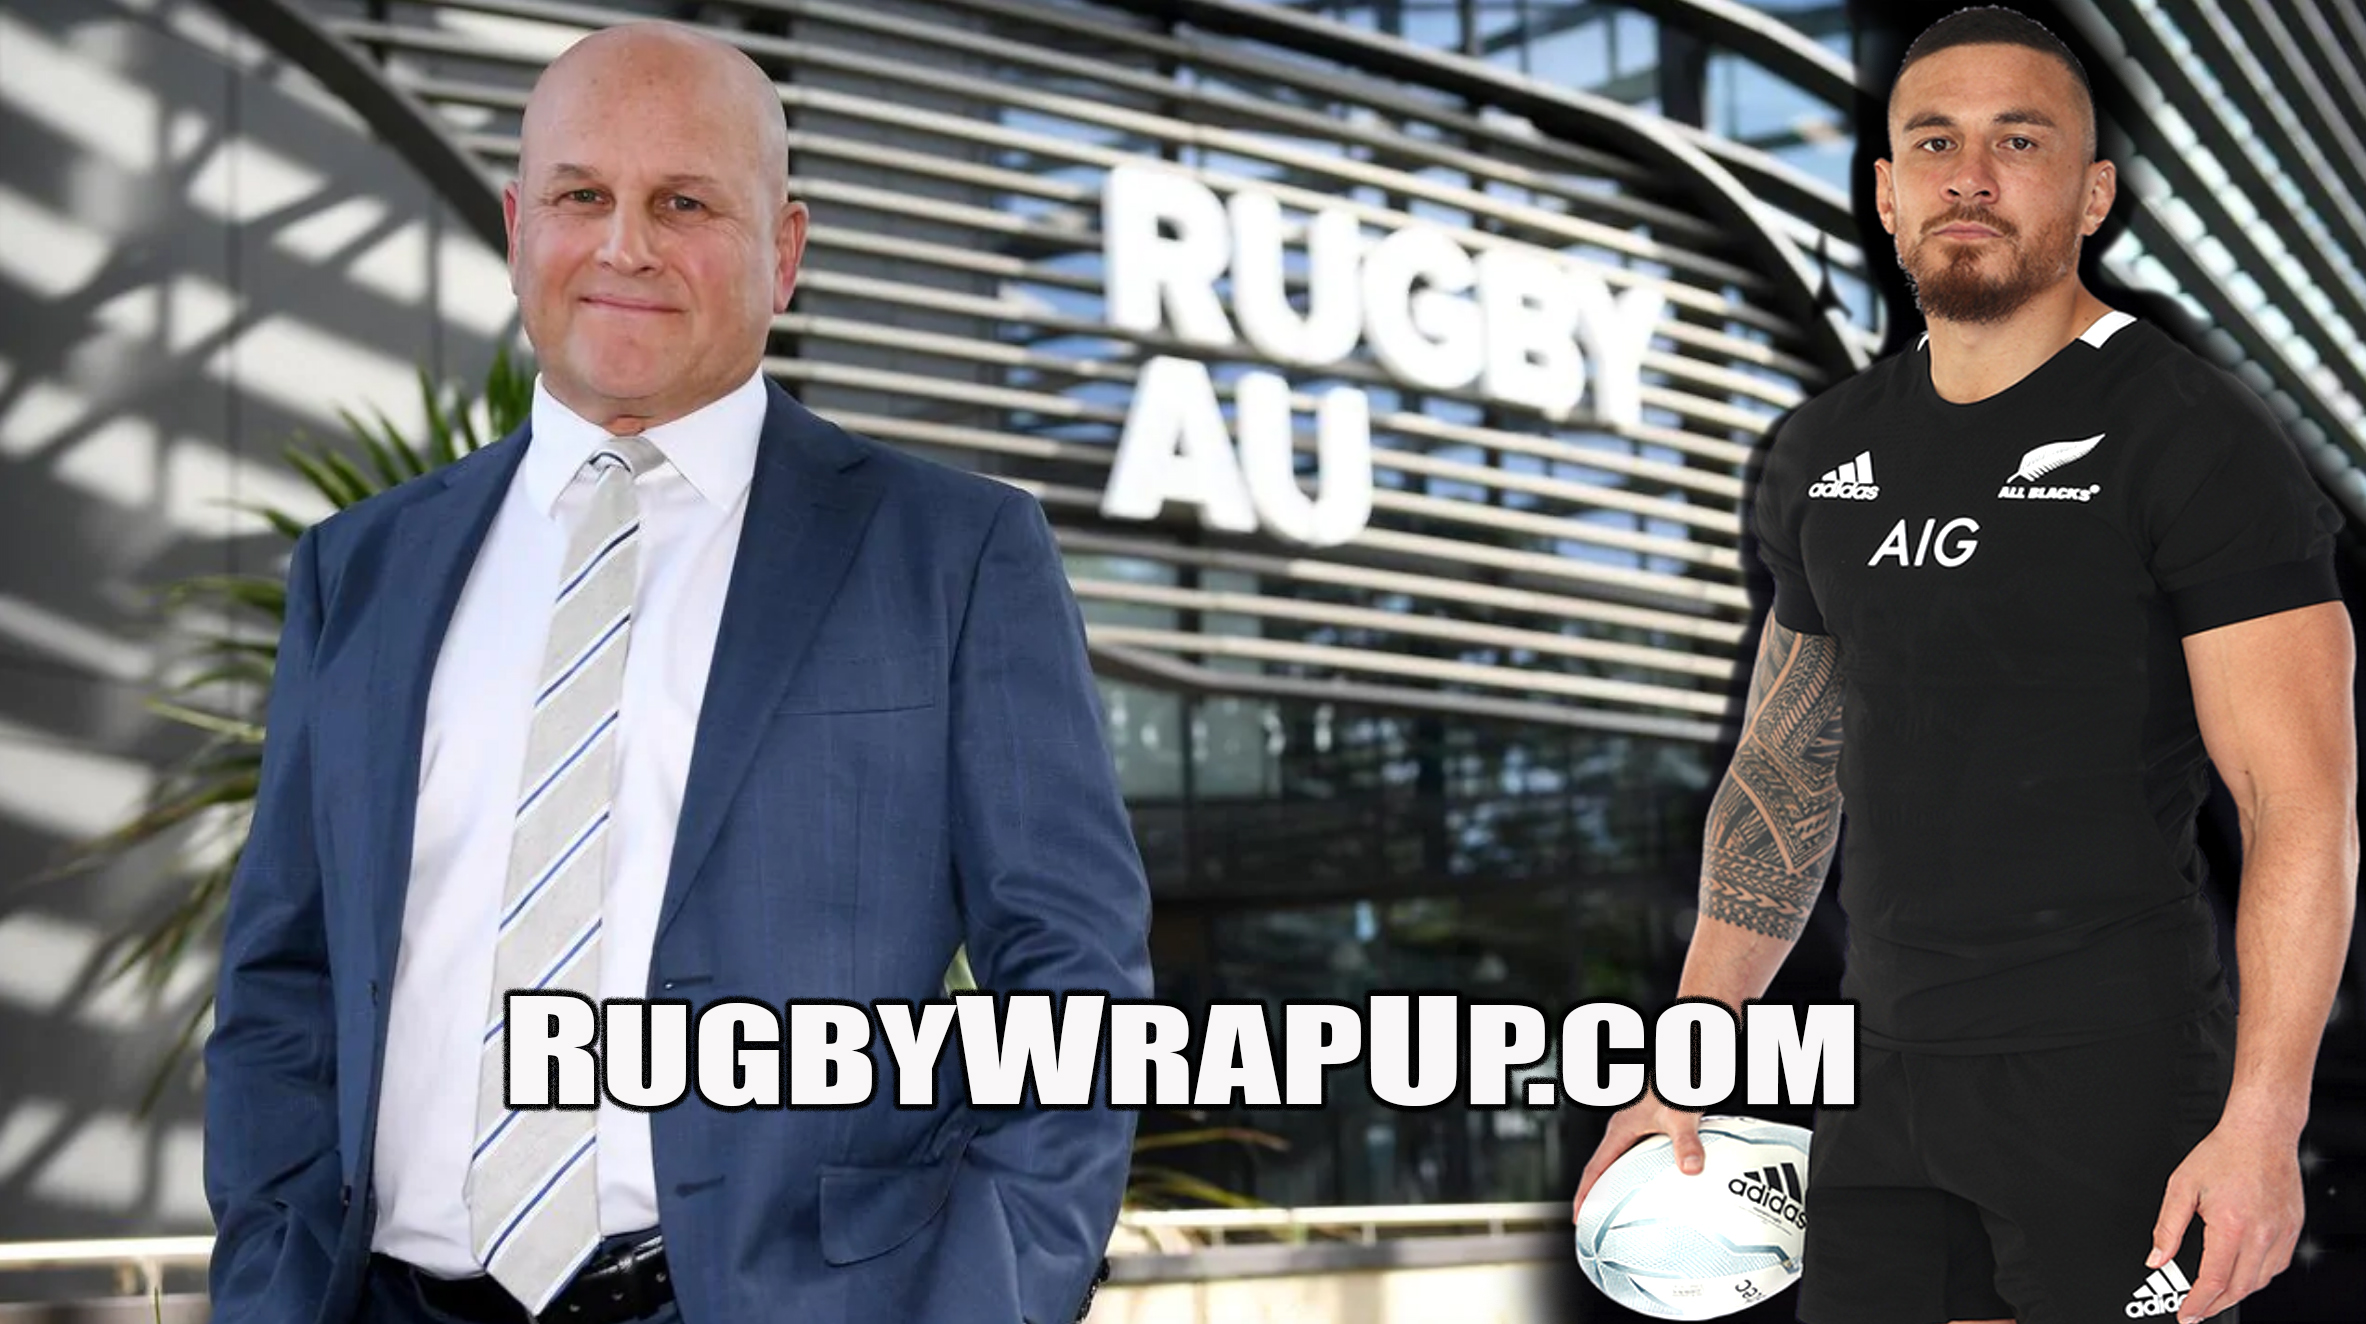 Australian betting sites, Rugby_Wrap_Up, Sonny_Bill_Williams, Rob_Clarke, NZRU, Super Rugby, Rugby Australia, NRL